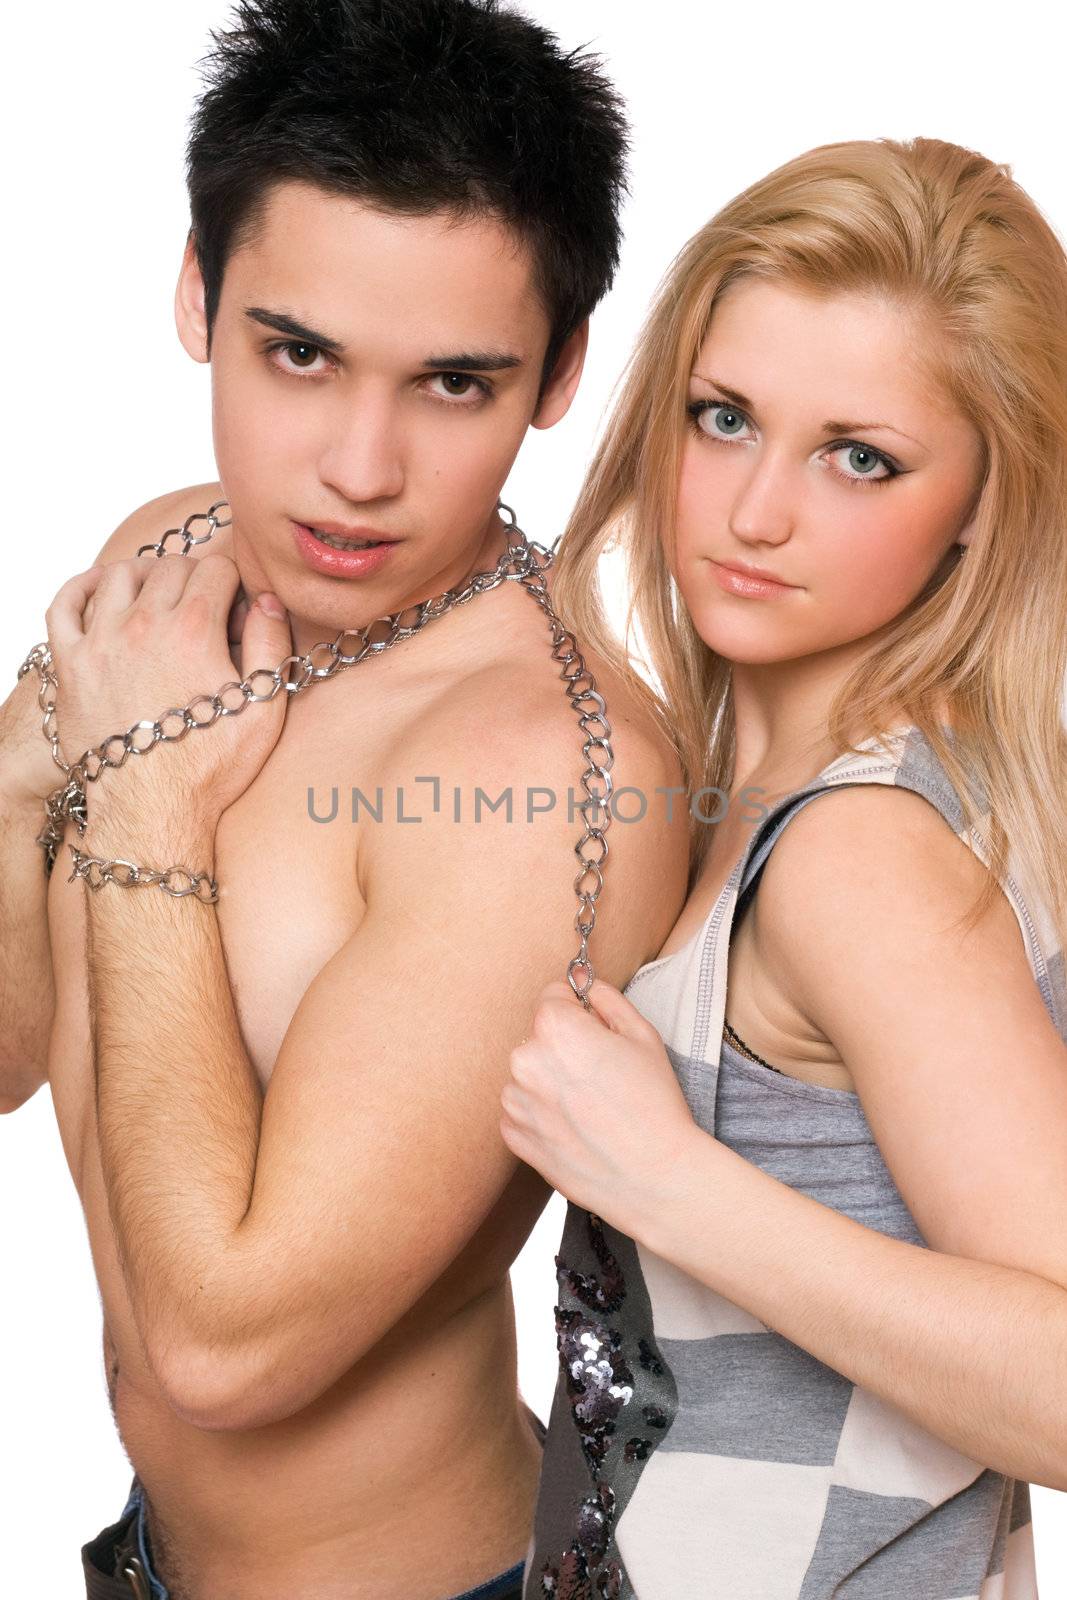 Attractive young woman and a guy in chains